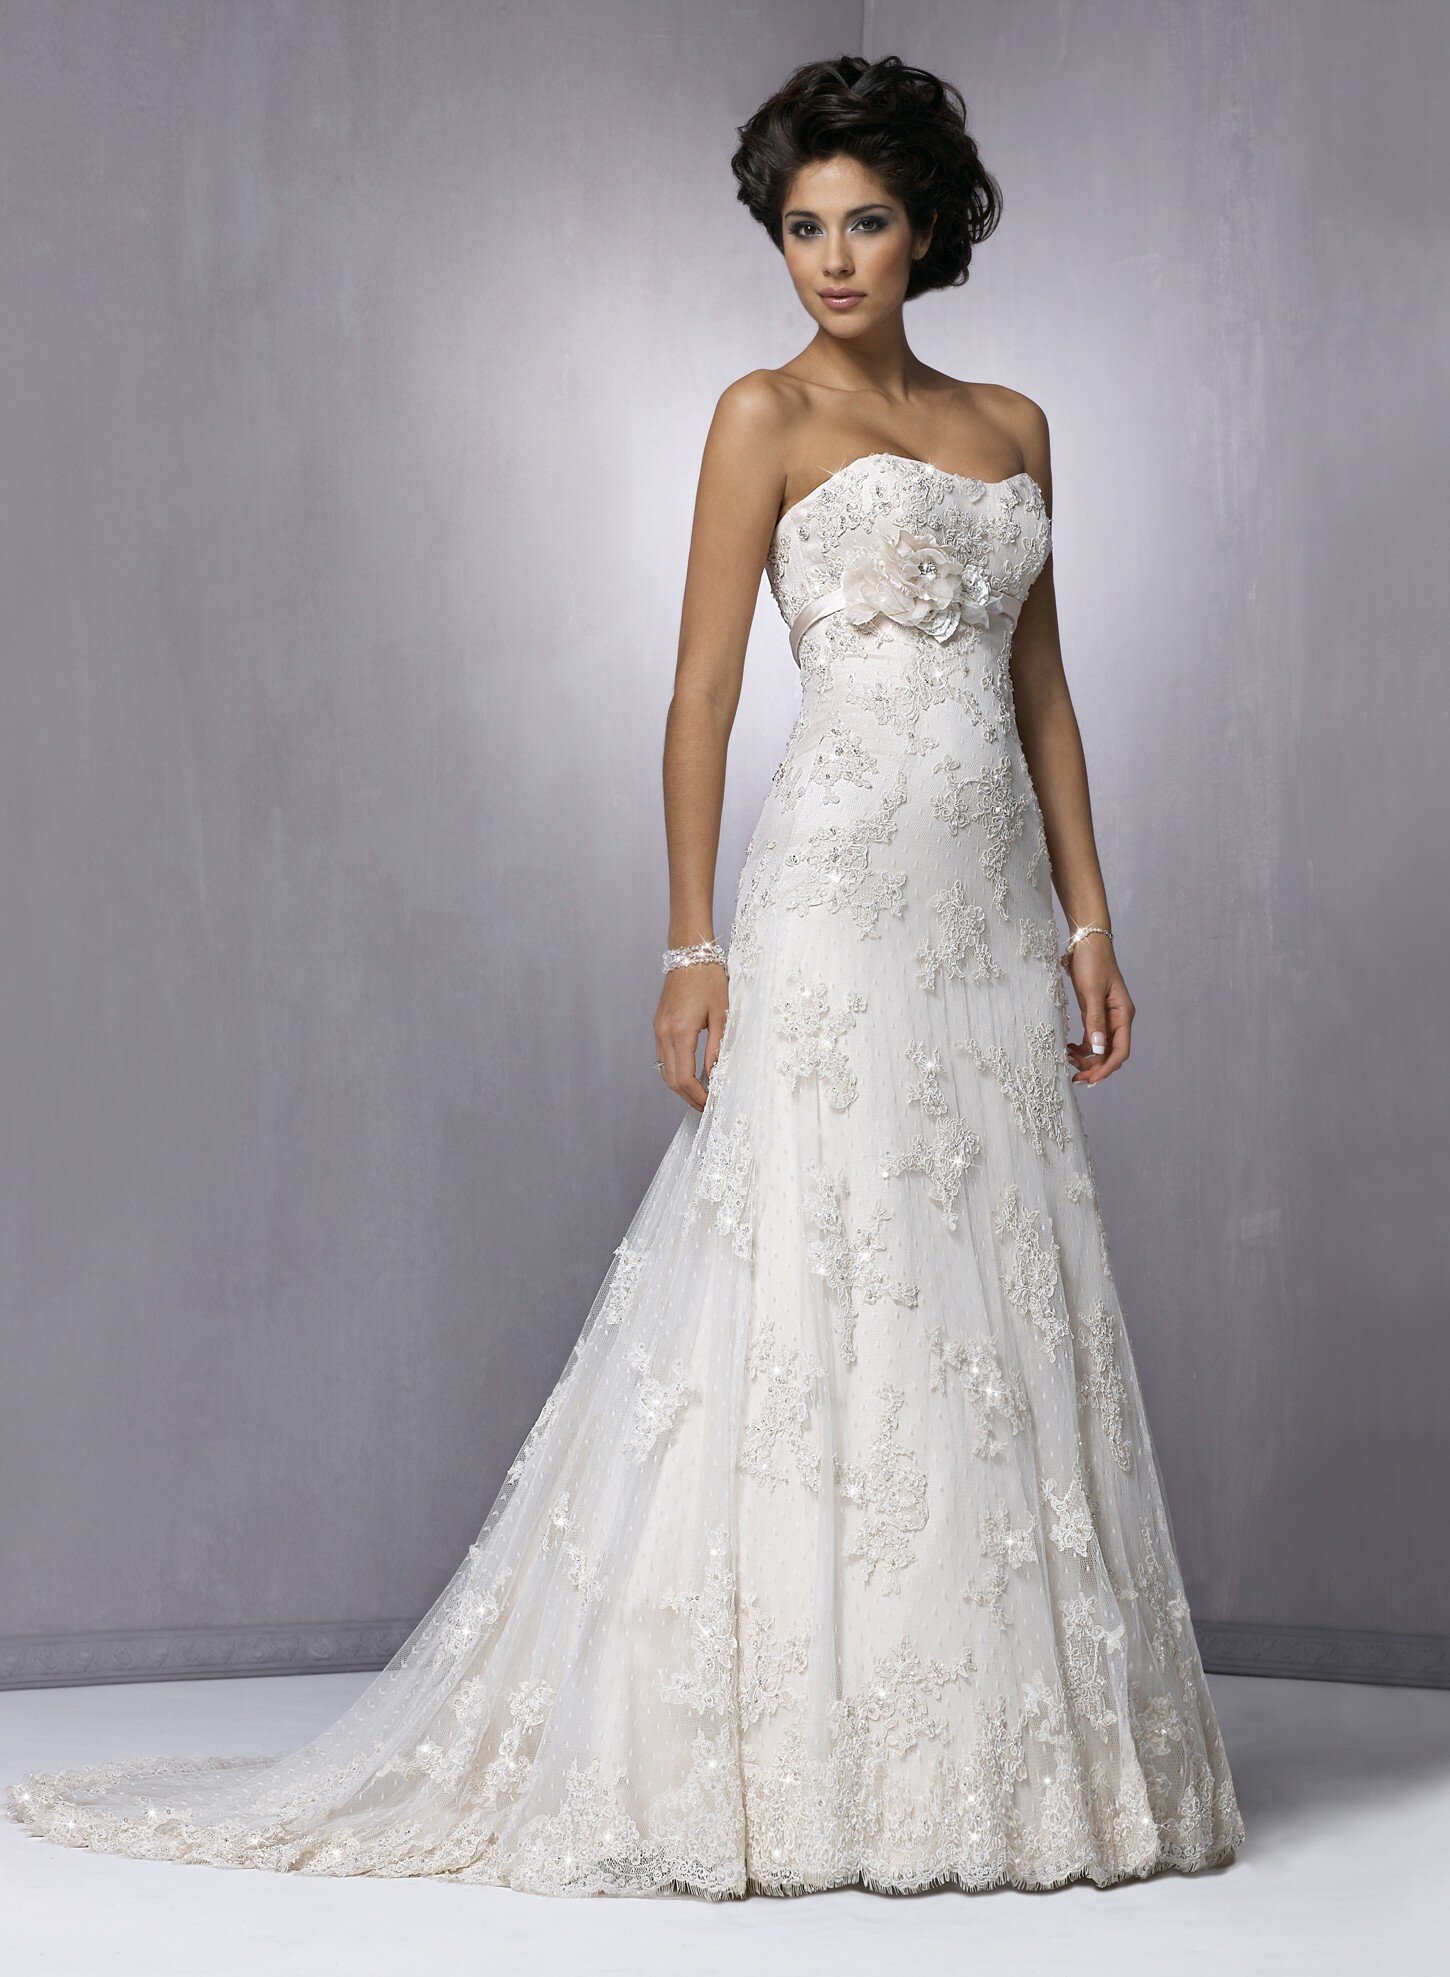 Wedding dresses with lace top Photo - 3